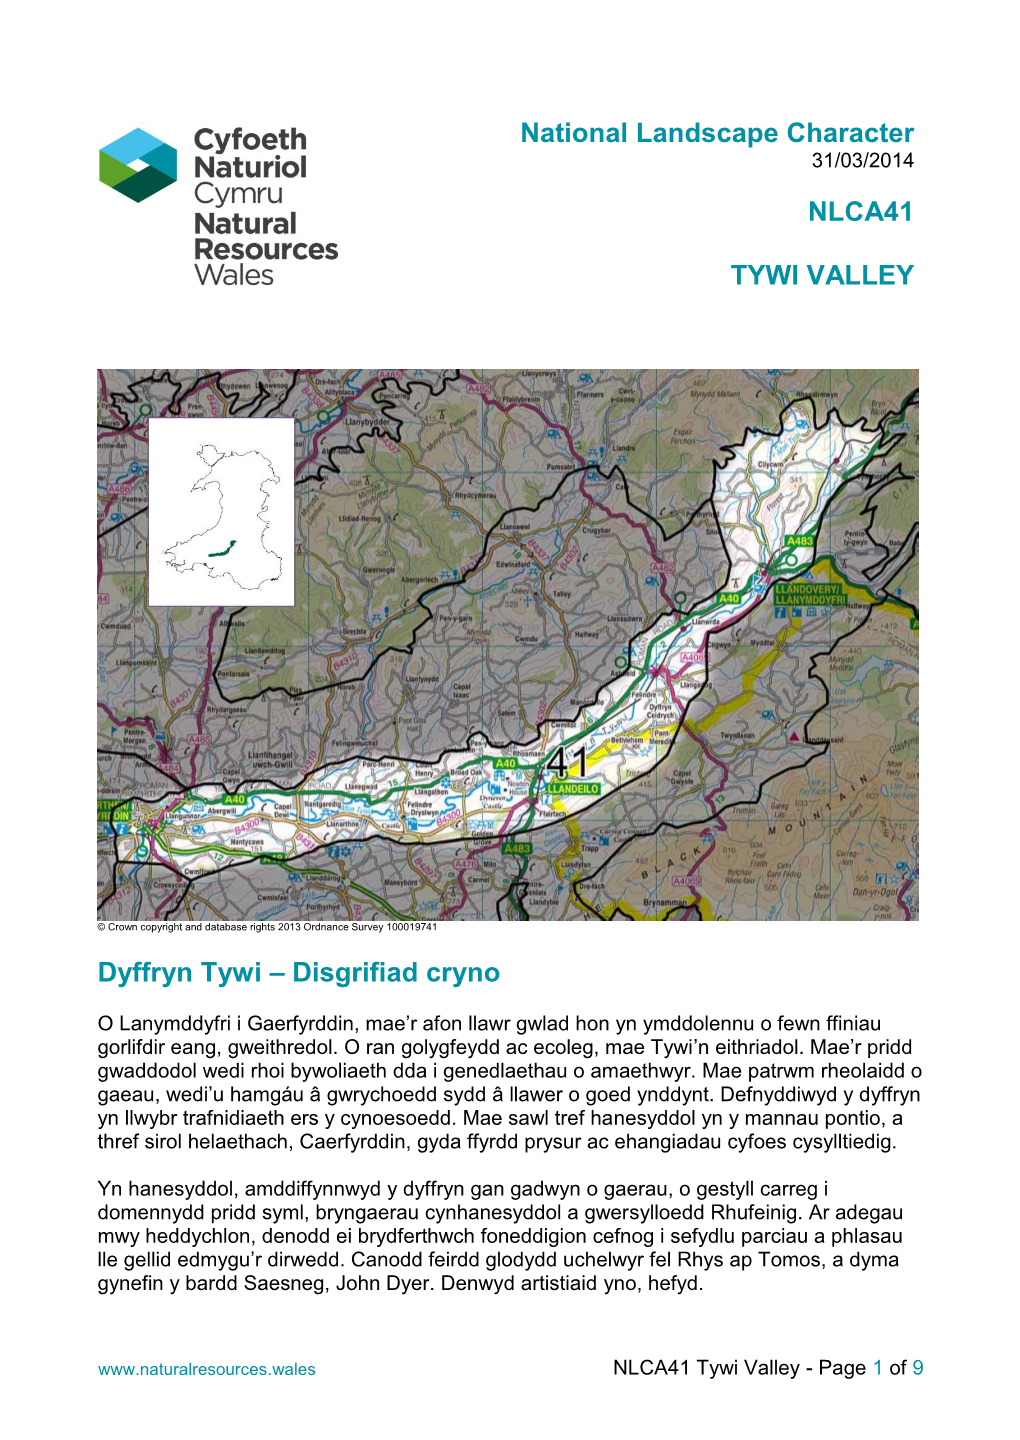 NLCA41 Tywi Valley - Page 1 of 9